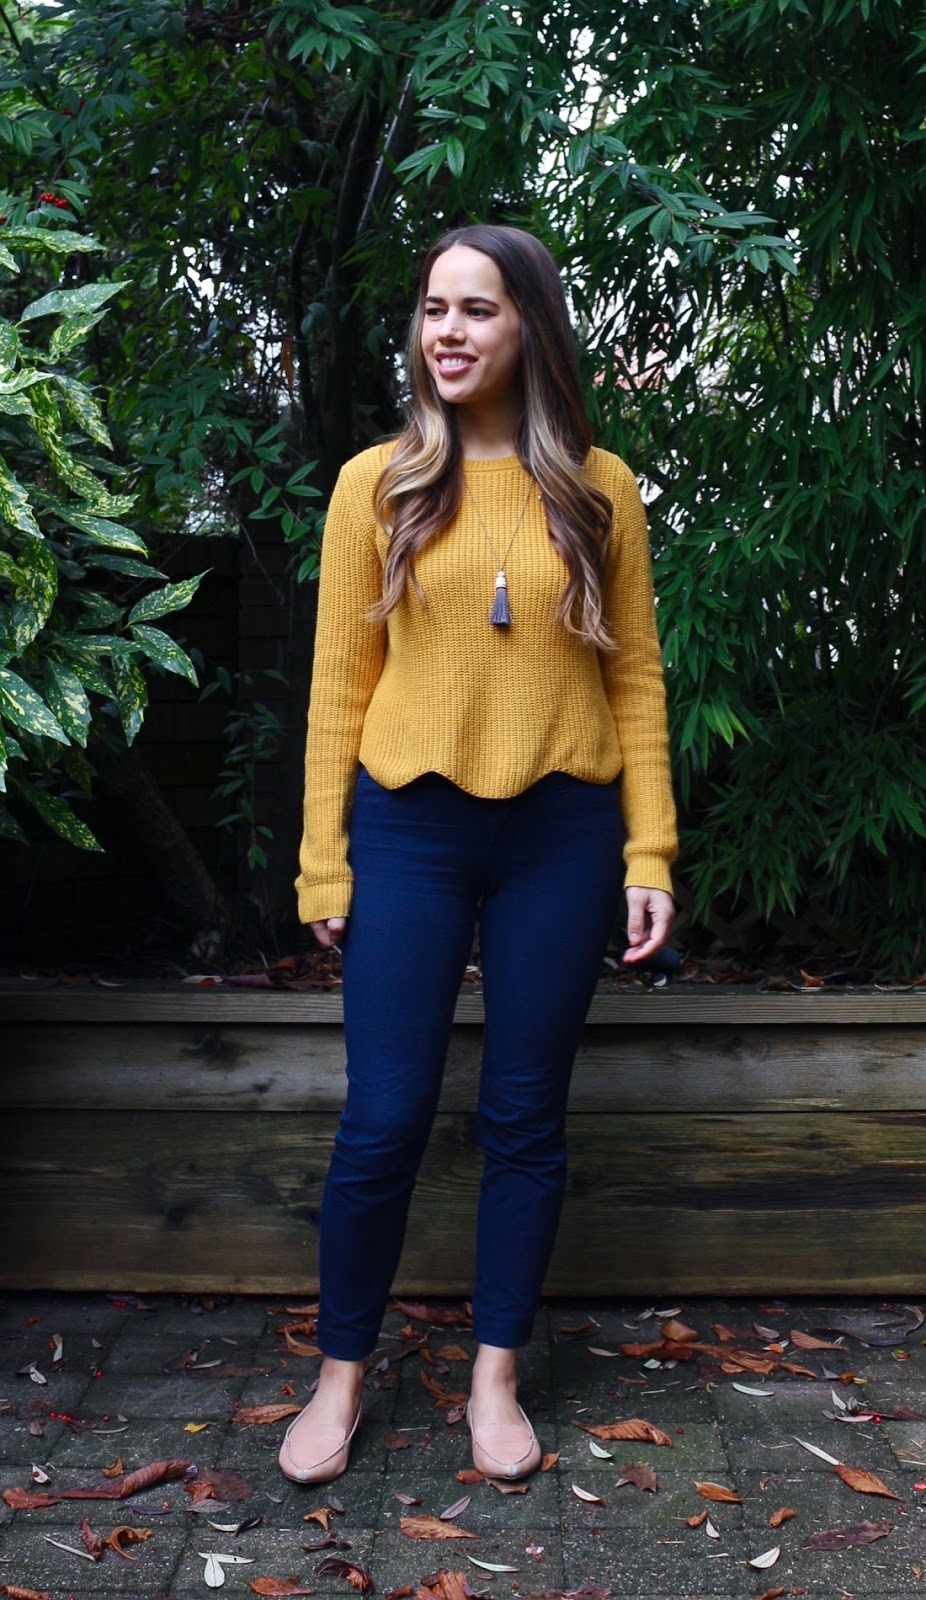 Jules in Flats - Scalloped Mustard Sweater Outfit Idea (Business Casual Winter Workwear on a Budget)